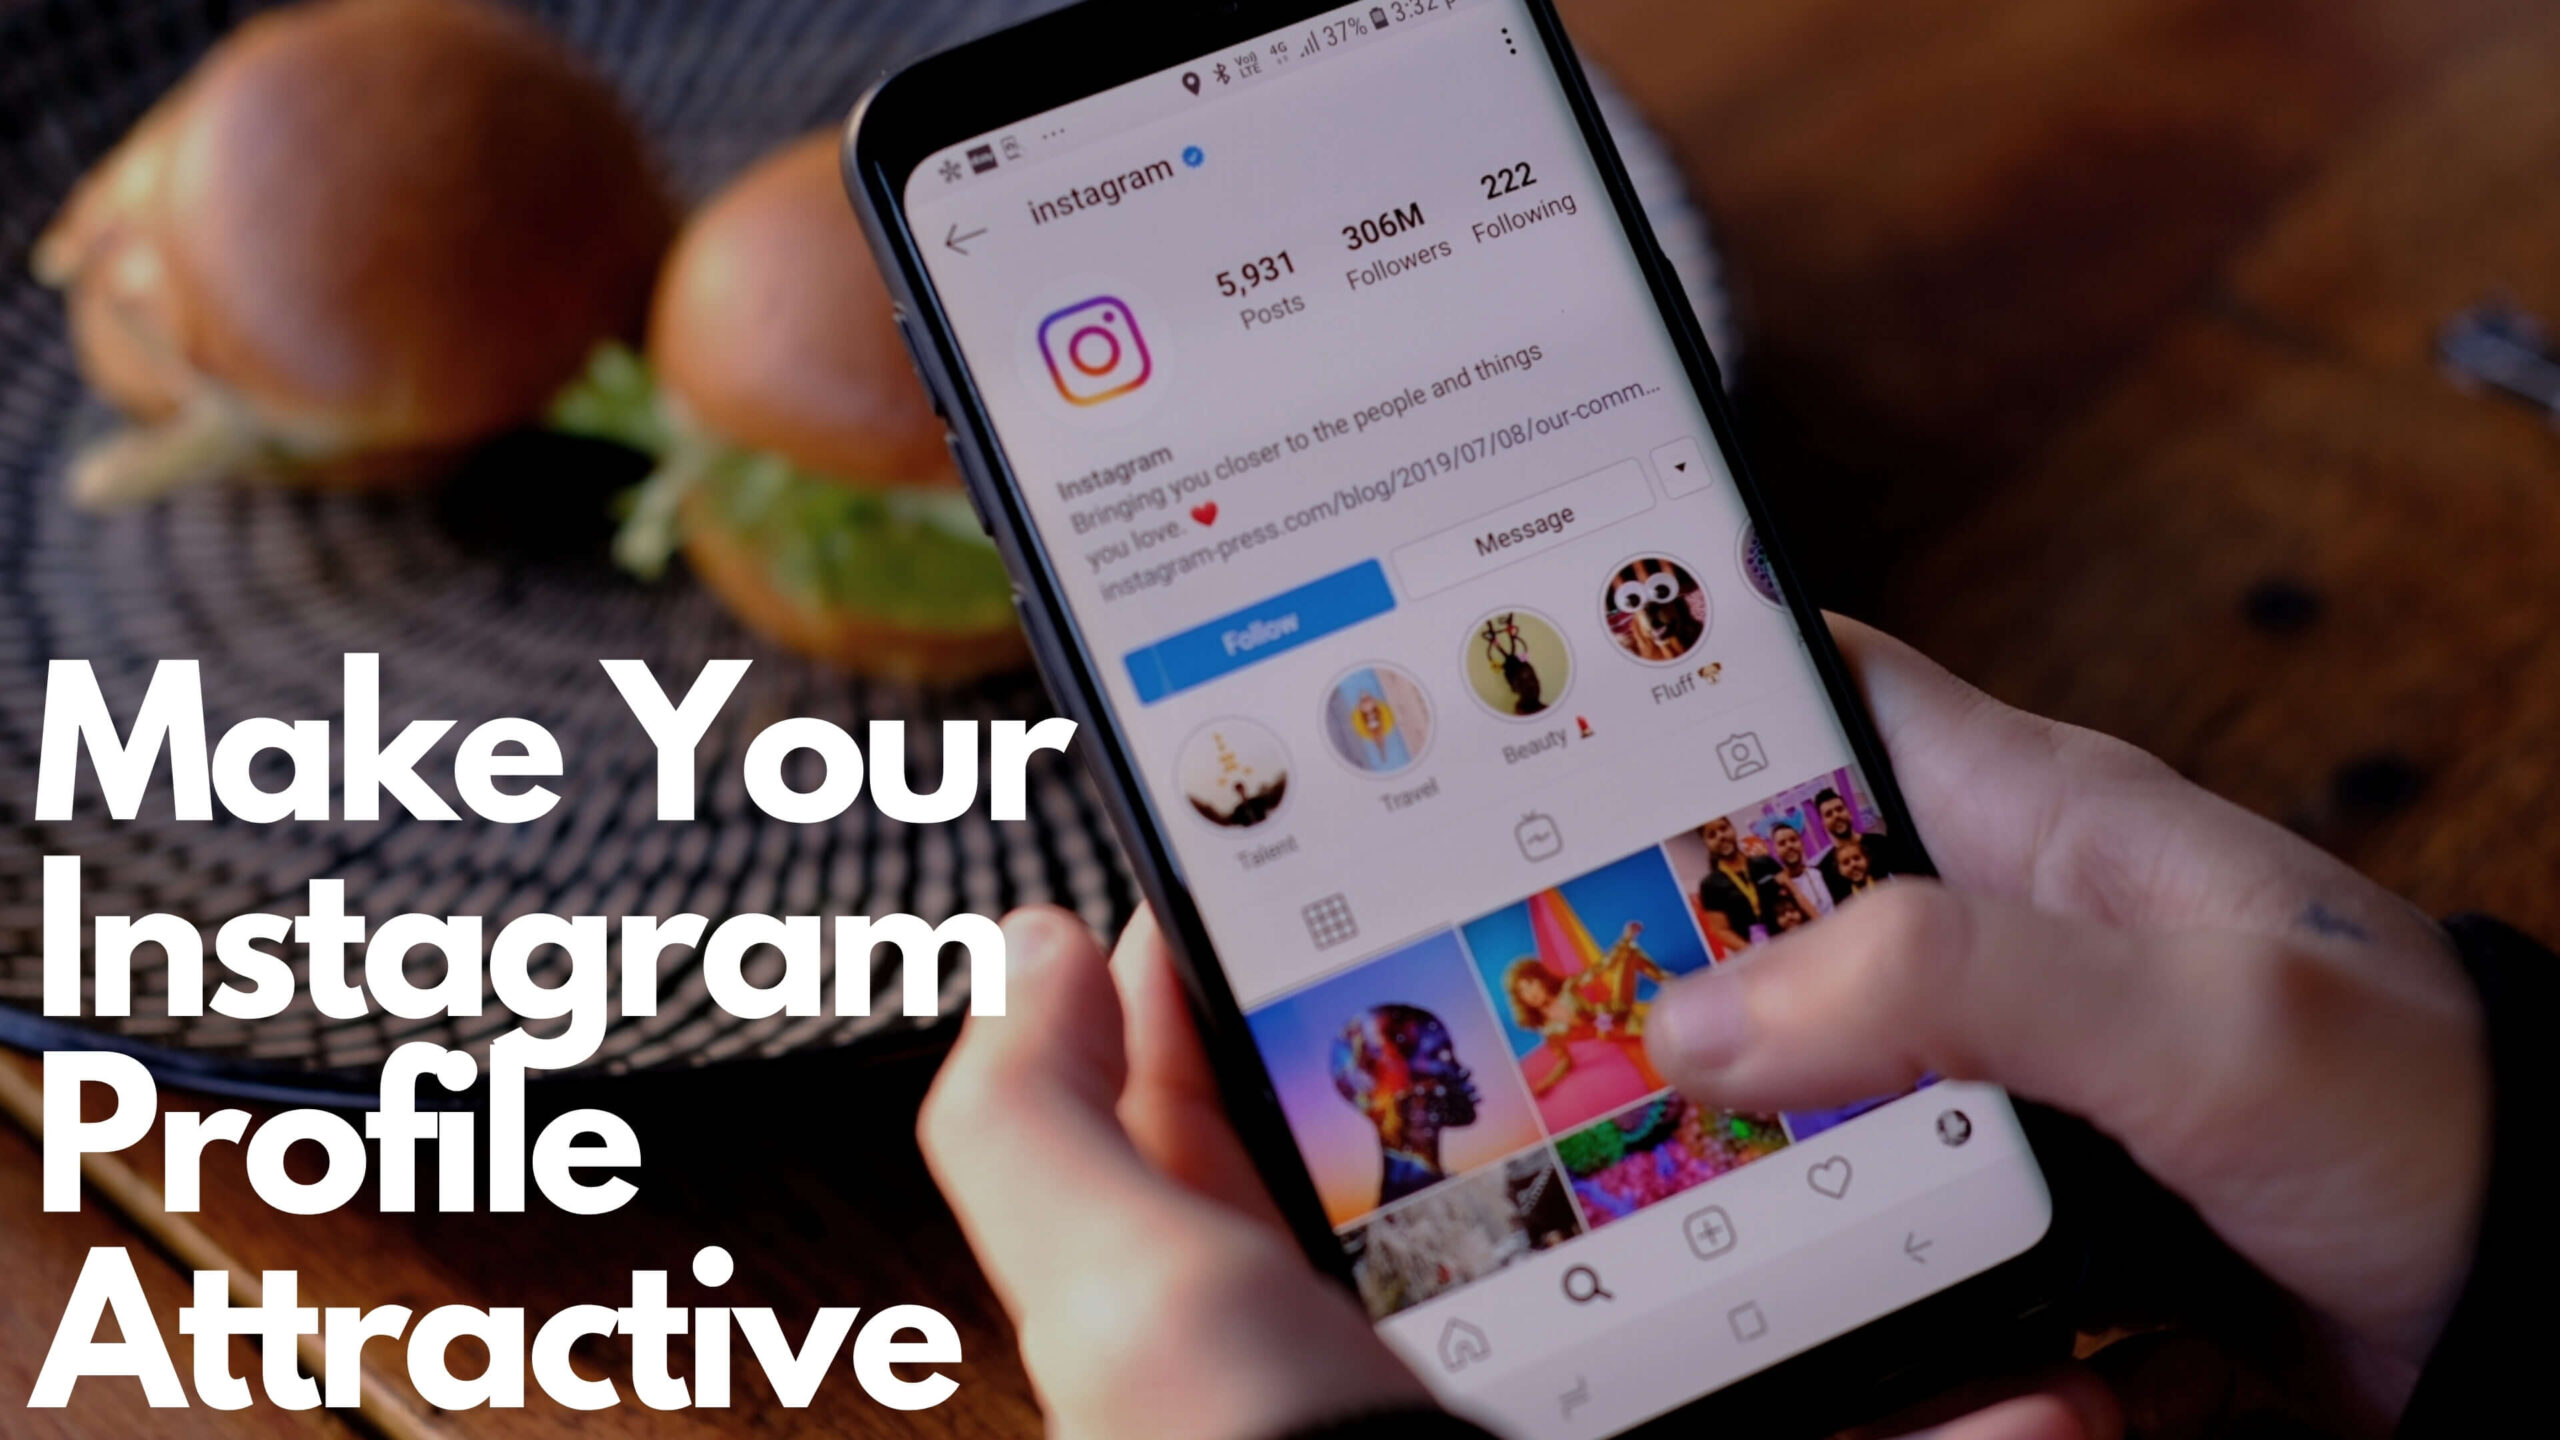 5 Easy Tips That Will Help Make Your Instagram Profile Attractive